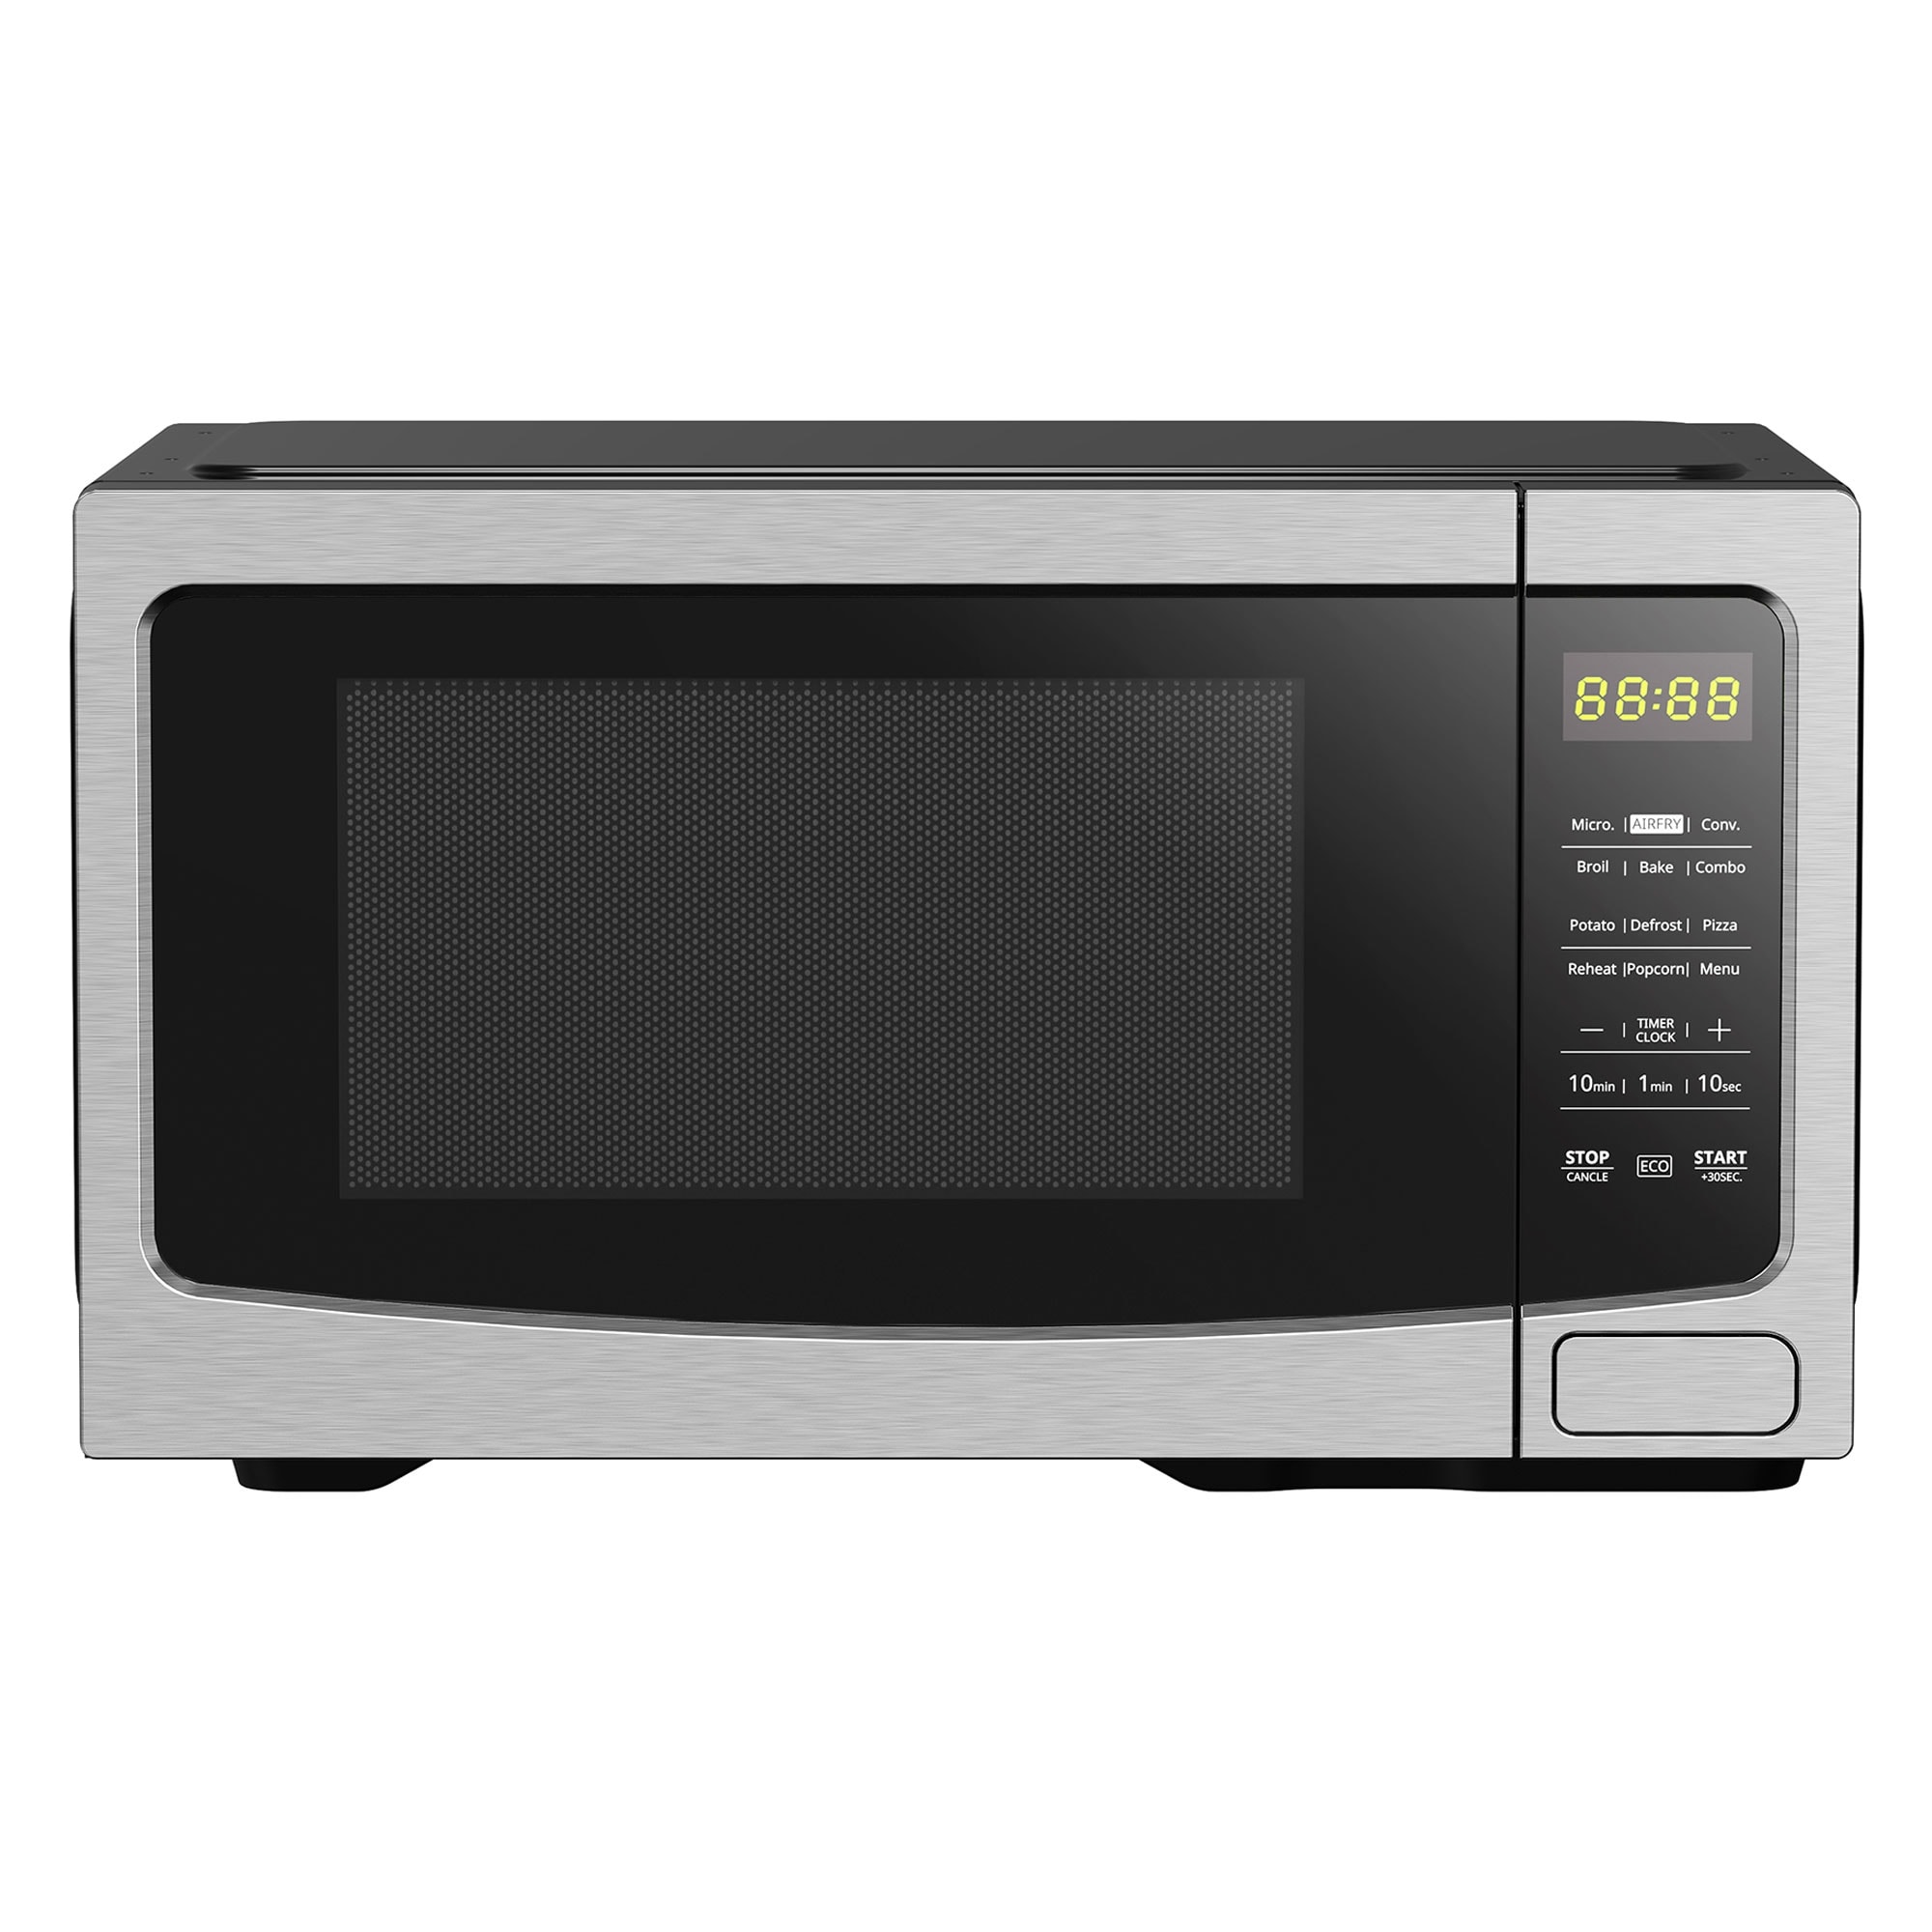 https://ak1.ostkcdn.com/images/products/is/images/direct/7b4c2aa425f38acc4fa4c88adc6091a52b1ce651/Black-and-Decker-5-In-1-Countertop-Microwave-with-Air-Fryer%2C-Stainless-Steel.jpg